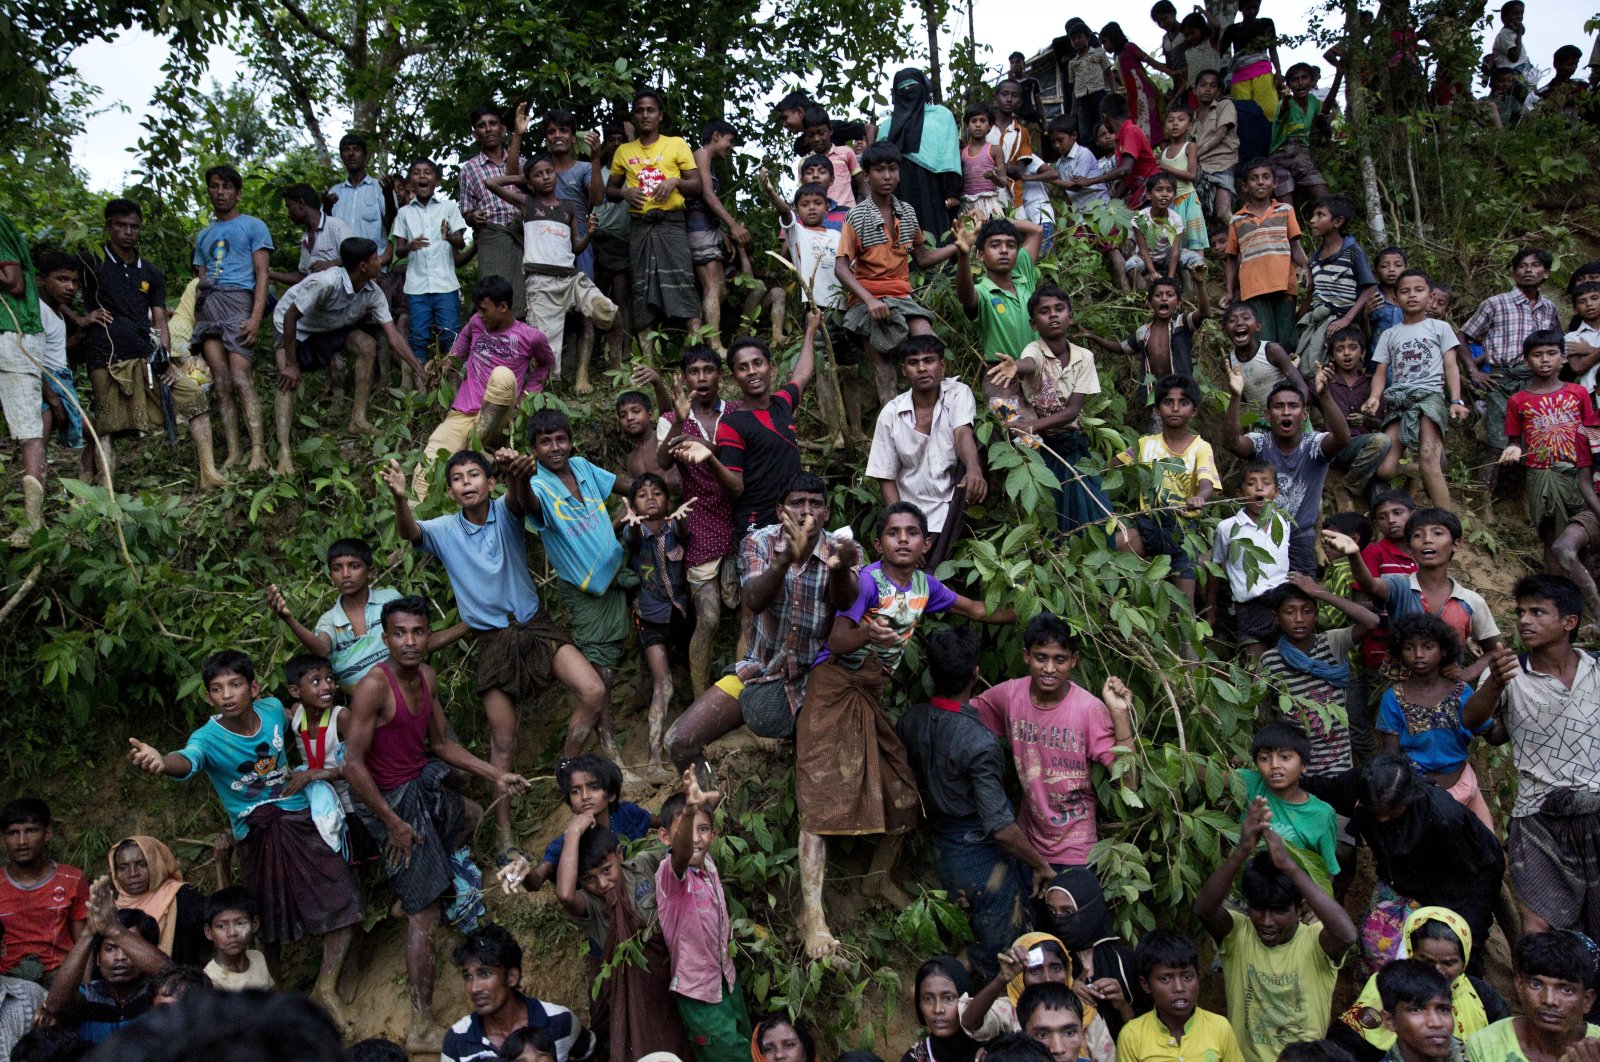 Rohingya Muslim refugees from Myanmar&#039;s Rakhine state stand on a slope and stretch their arms out to receive food being distributed near the Balukhali refugee camp in Cox&#039;s Bazar, Bangladesh, Sept. 20, 2017. (AP File Photo)